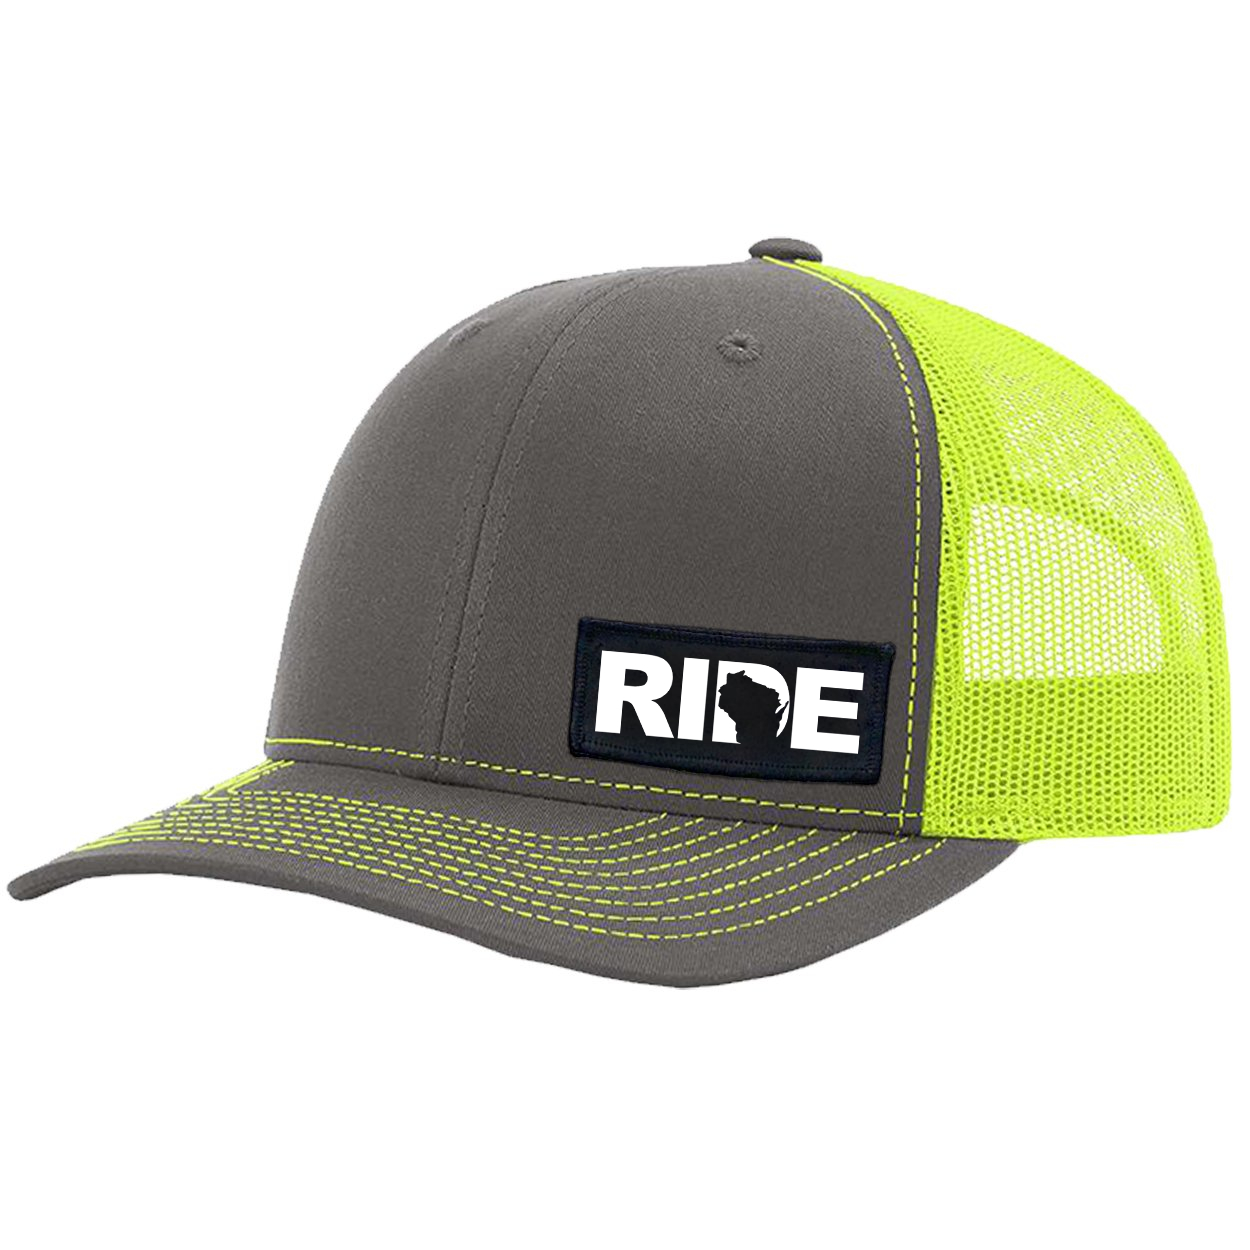 Ride Wisconsin Night Out Woven Patch Snapback Trucker Hat Gray/Neon Yellow (White Logo)